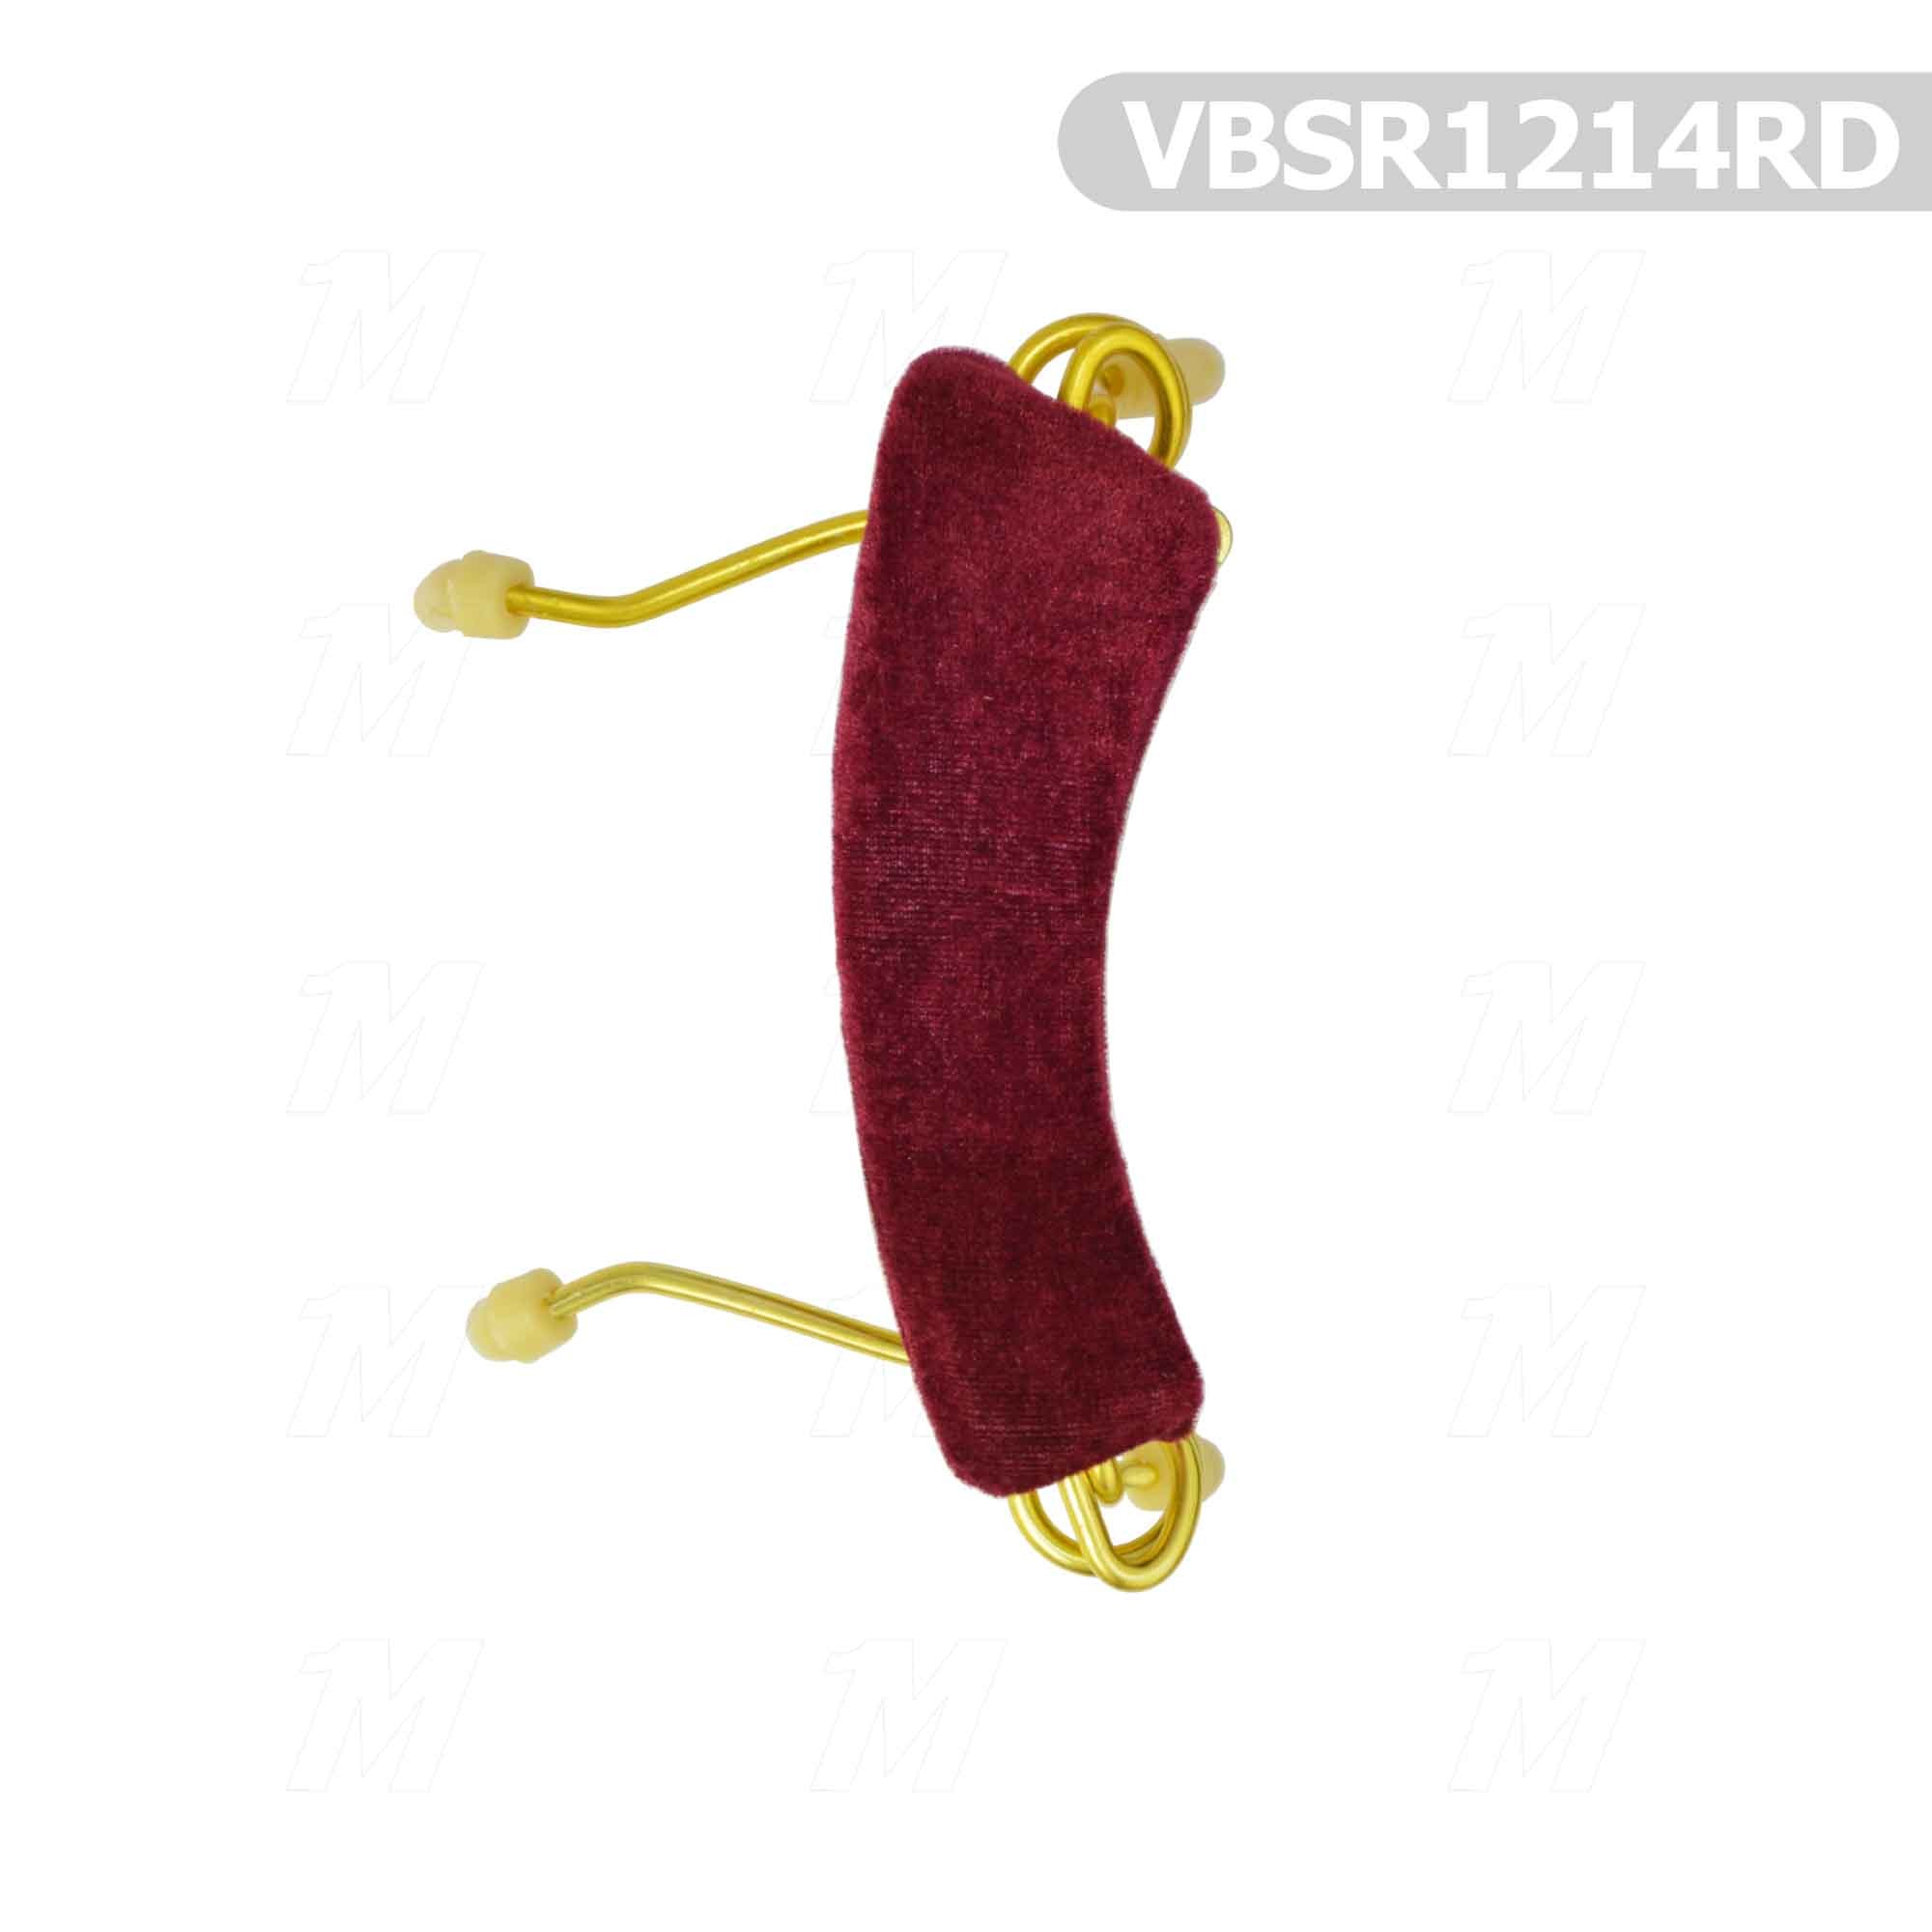 VIOLIN CUSHİON RED METAL 1/2 and 1/4 VBSR1214RD